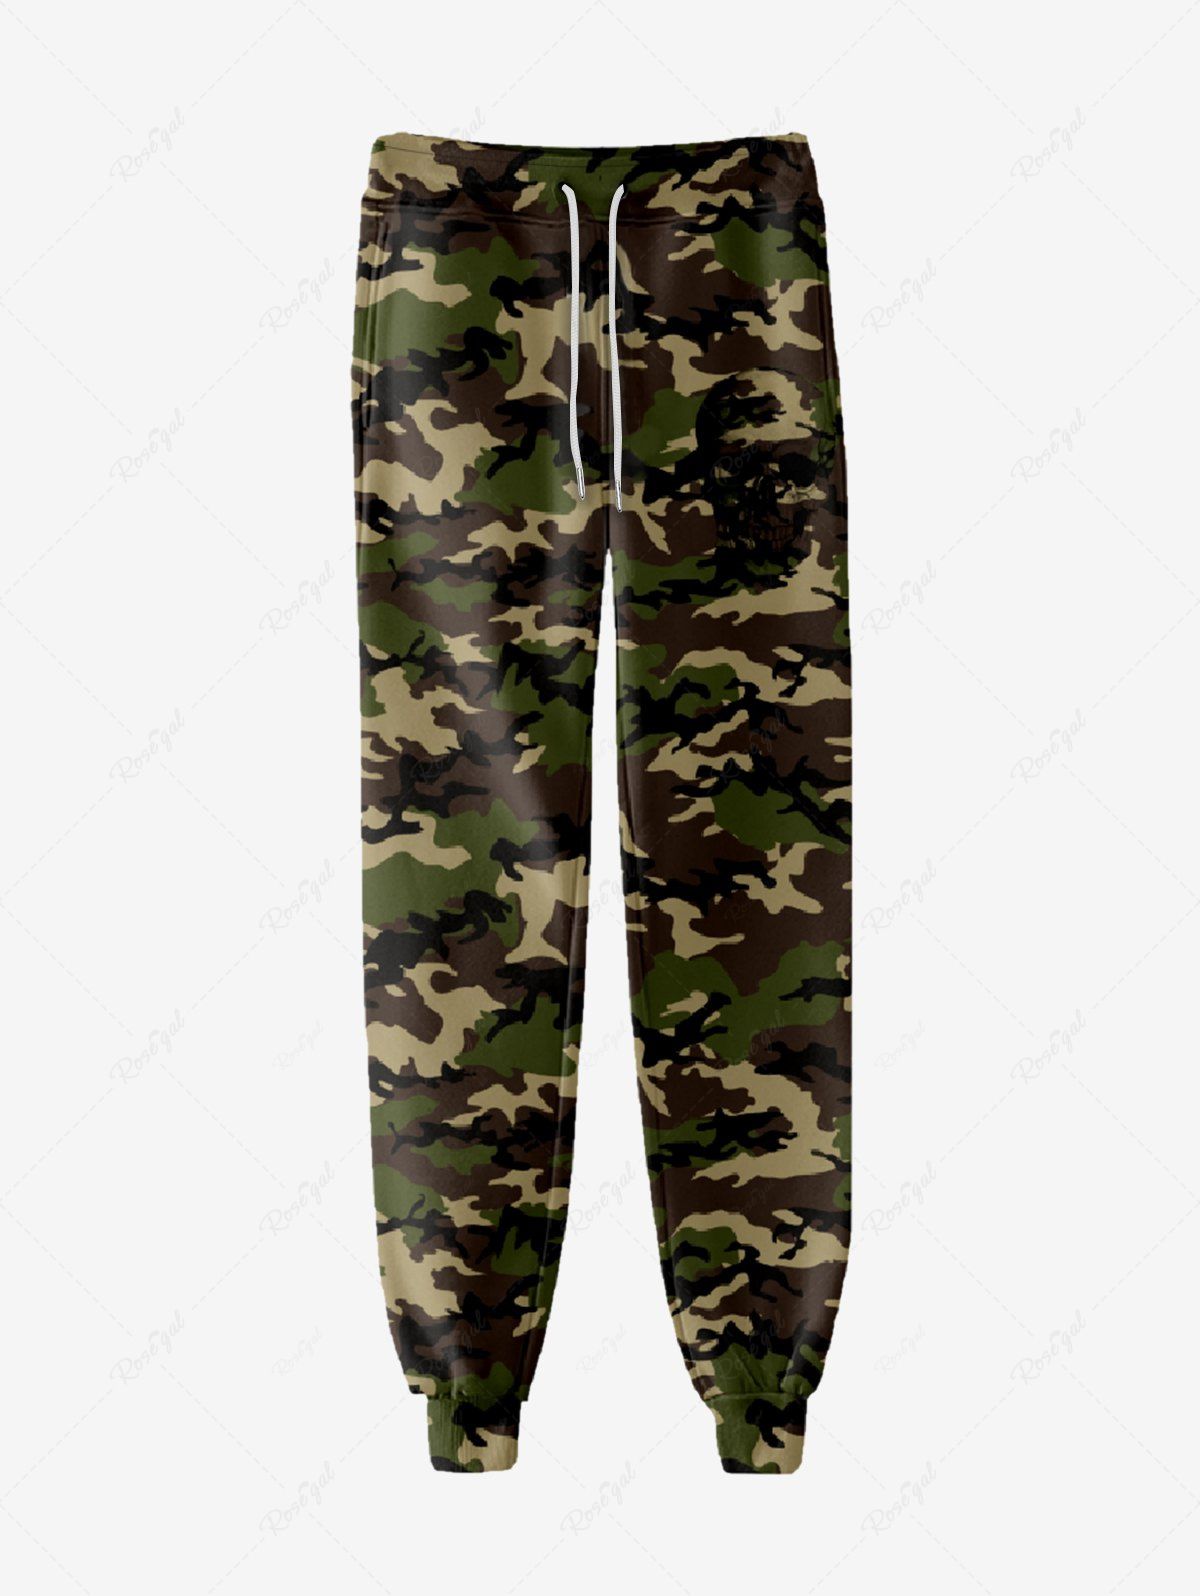 Trendy Gothic Camouflage Drawstring Pockets Sweatpants For Men  